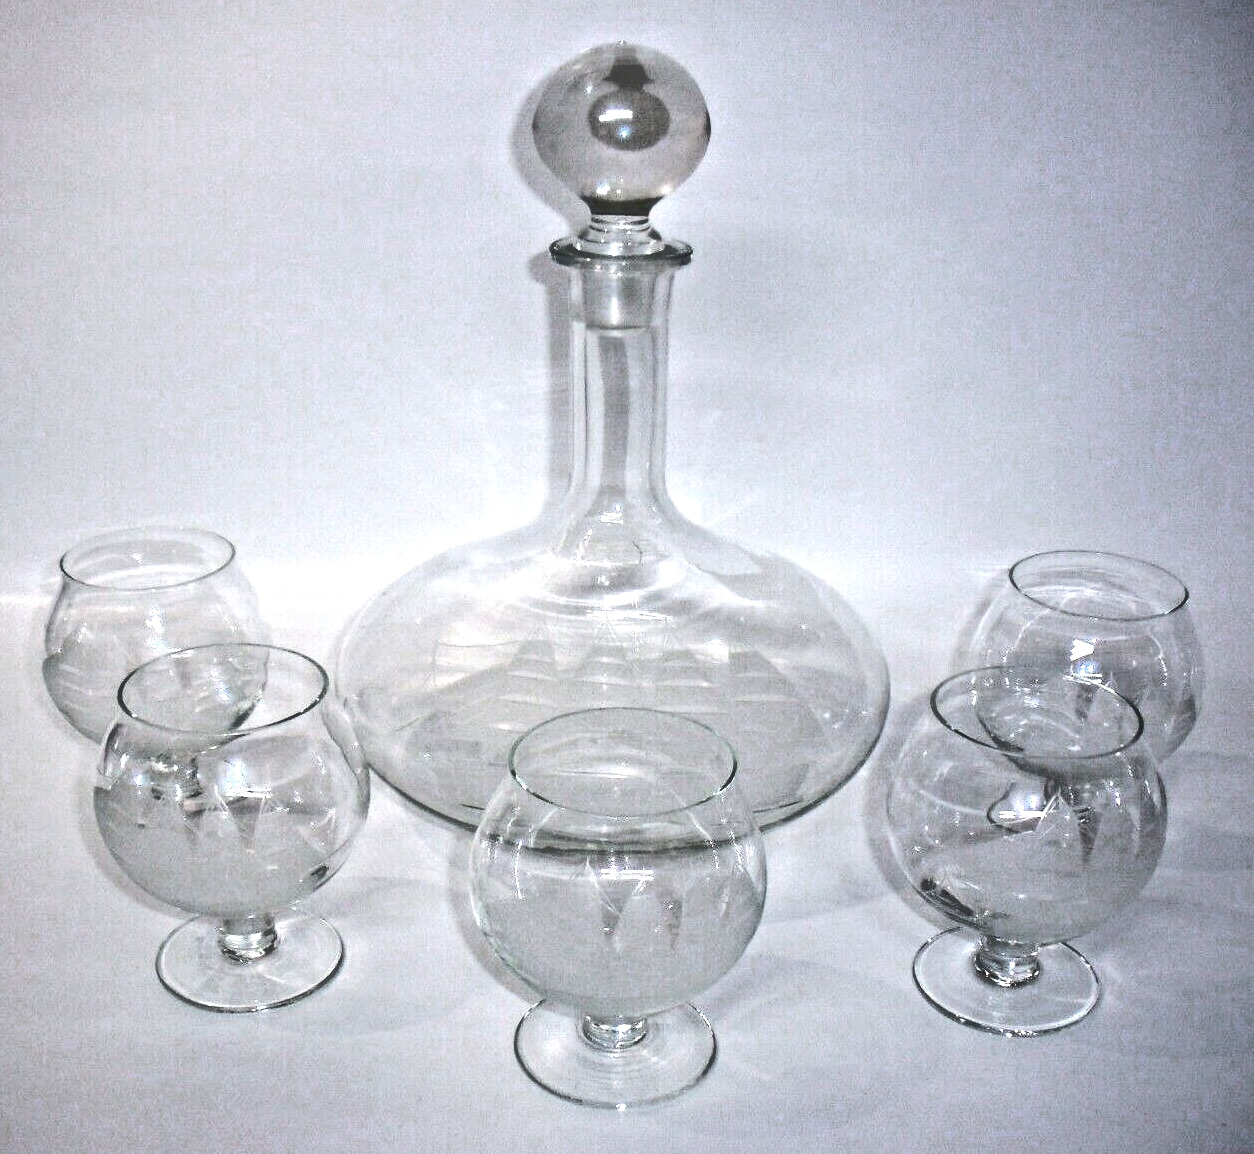 Vtg Toscany Etched Clipper Ship Decanter & 5 Snifters Romanian Nautical Barware